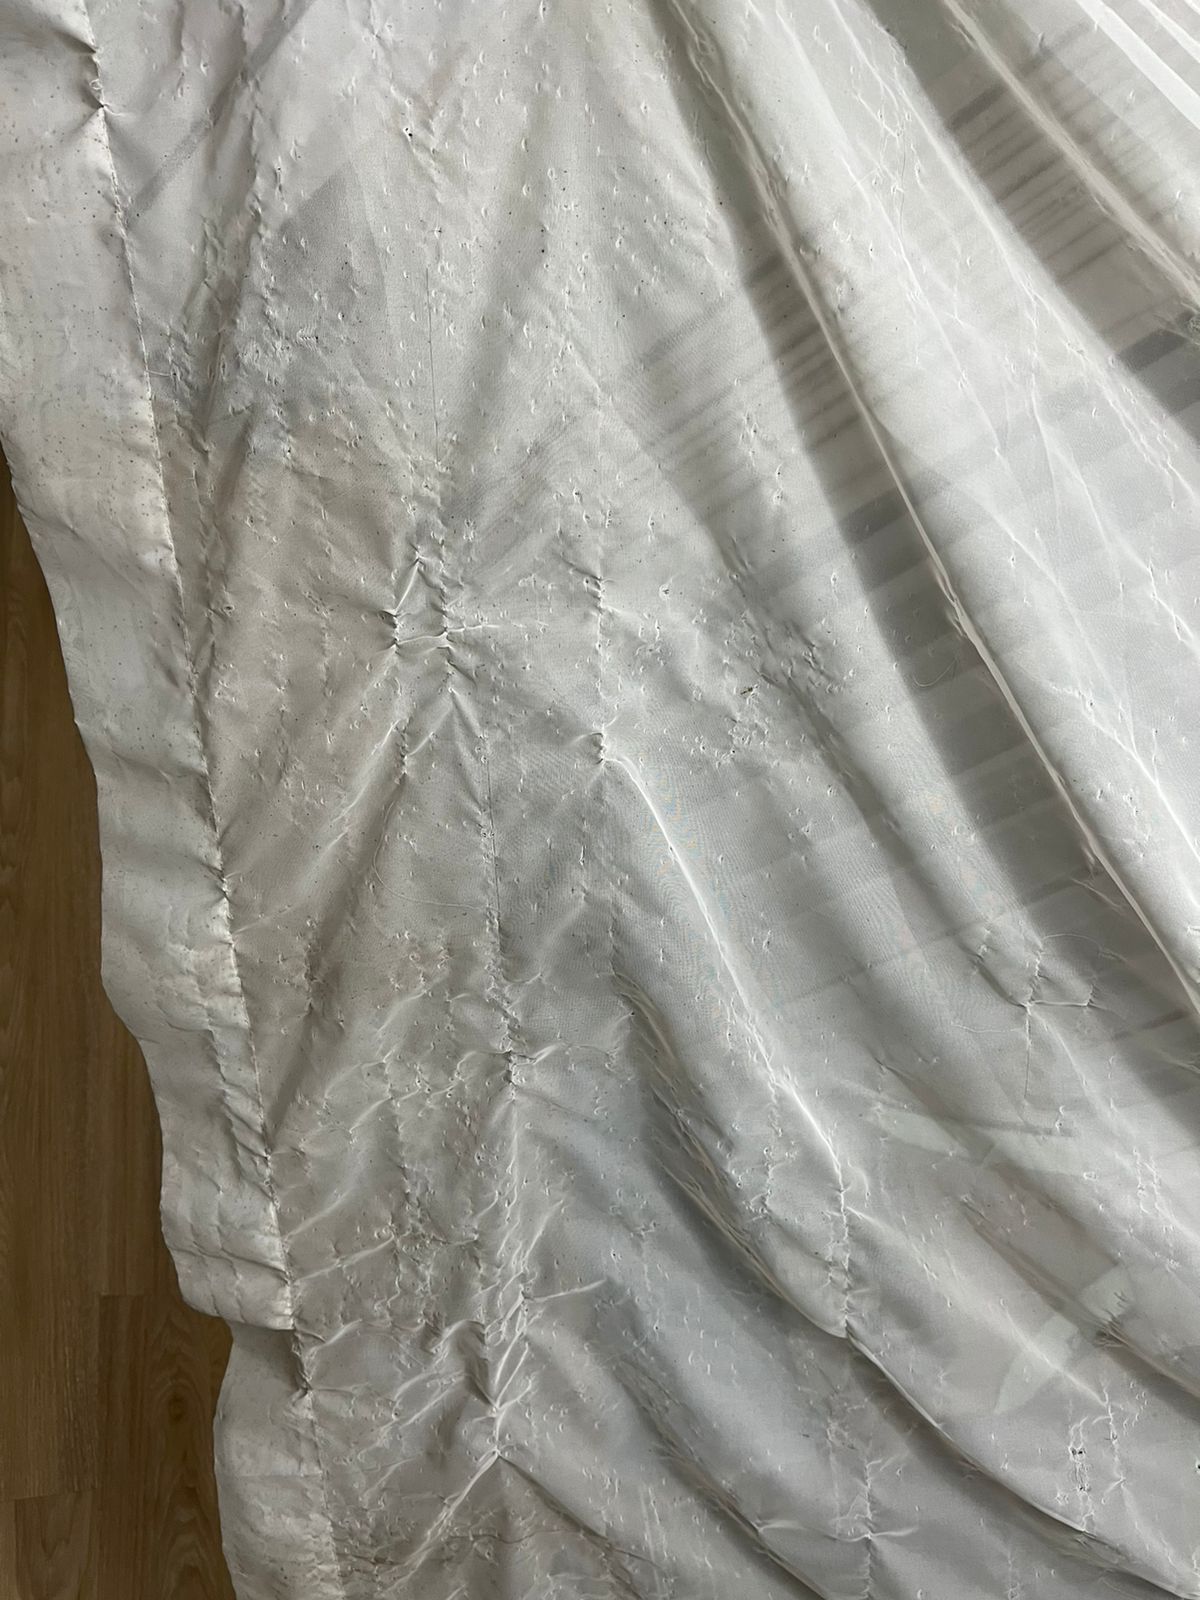 Scratched curtain replacement